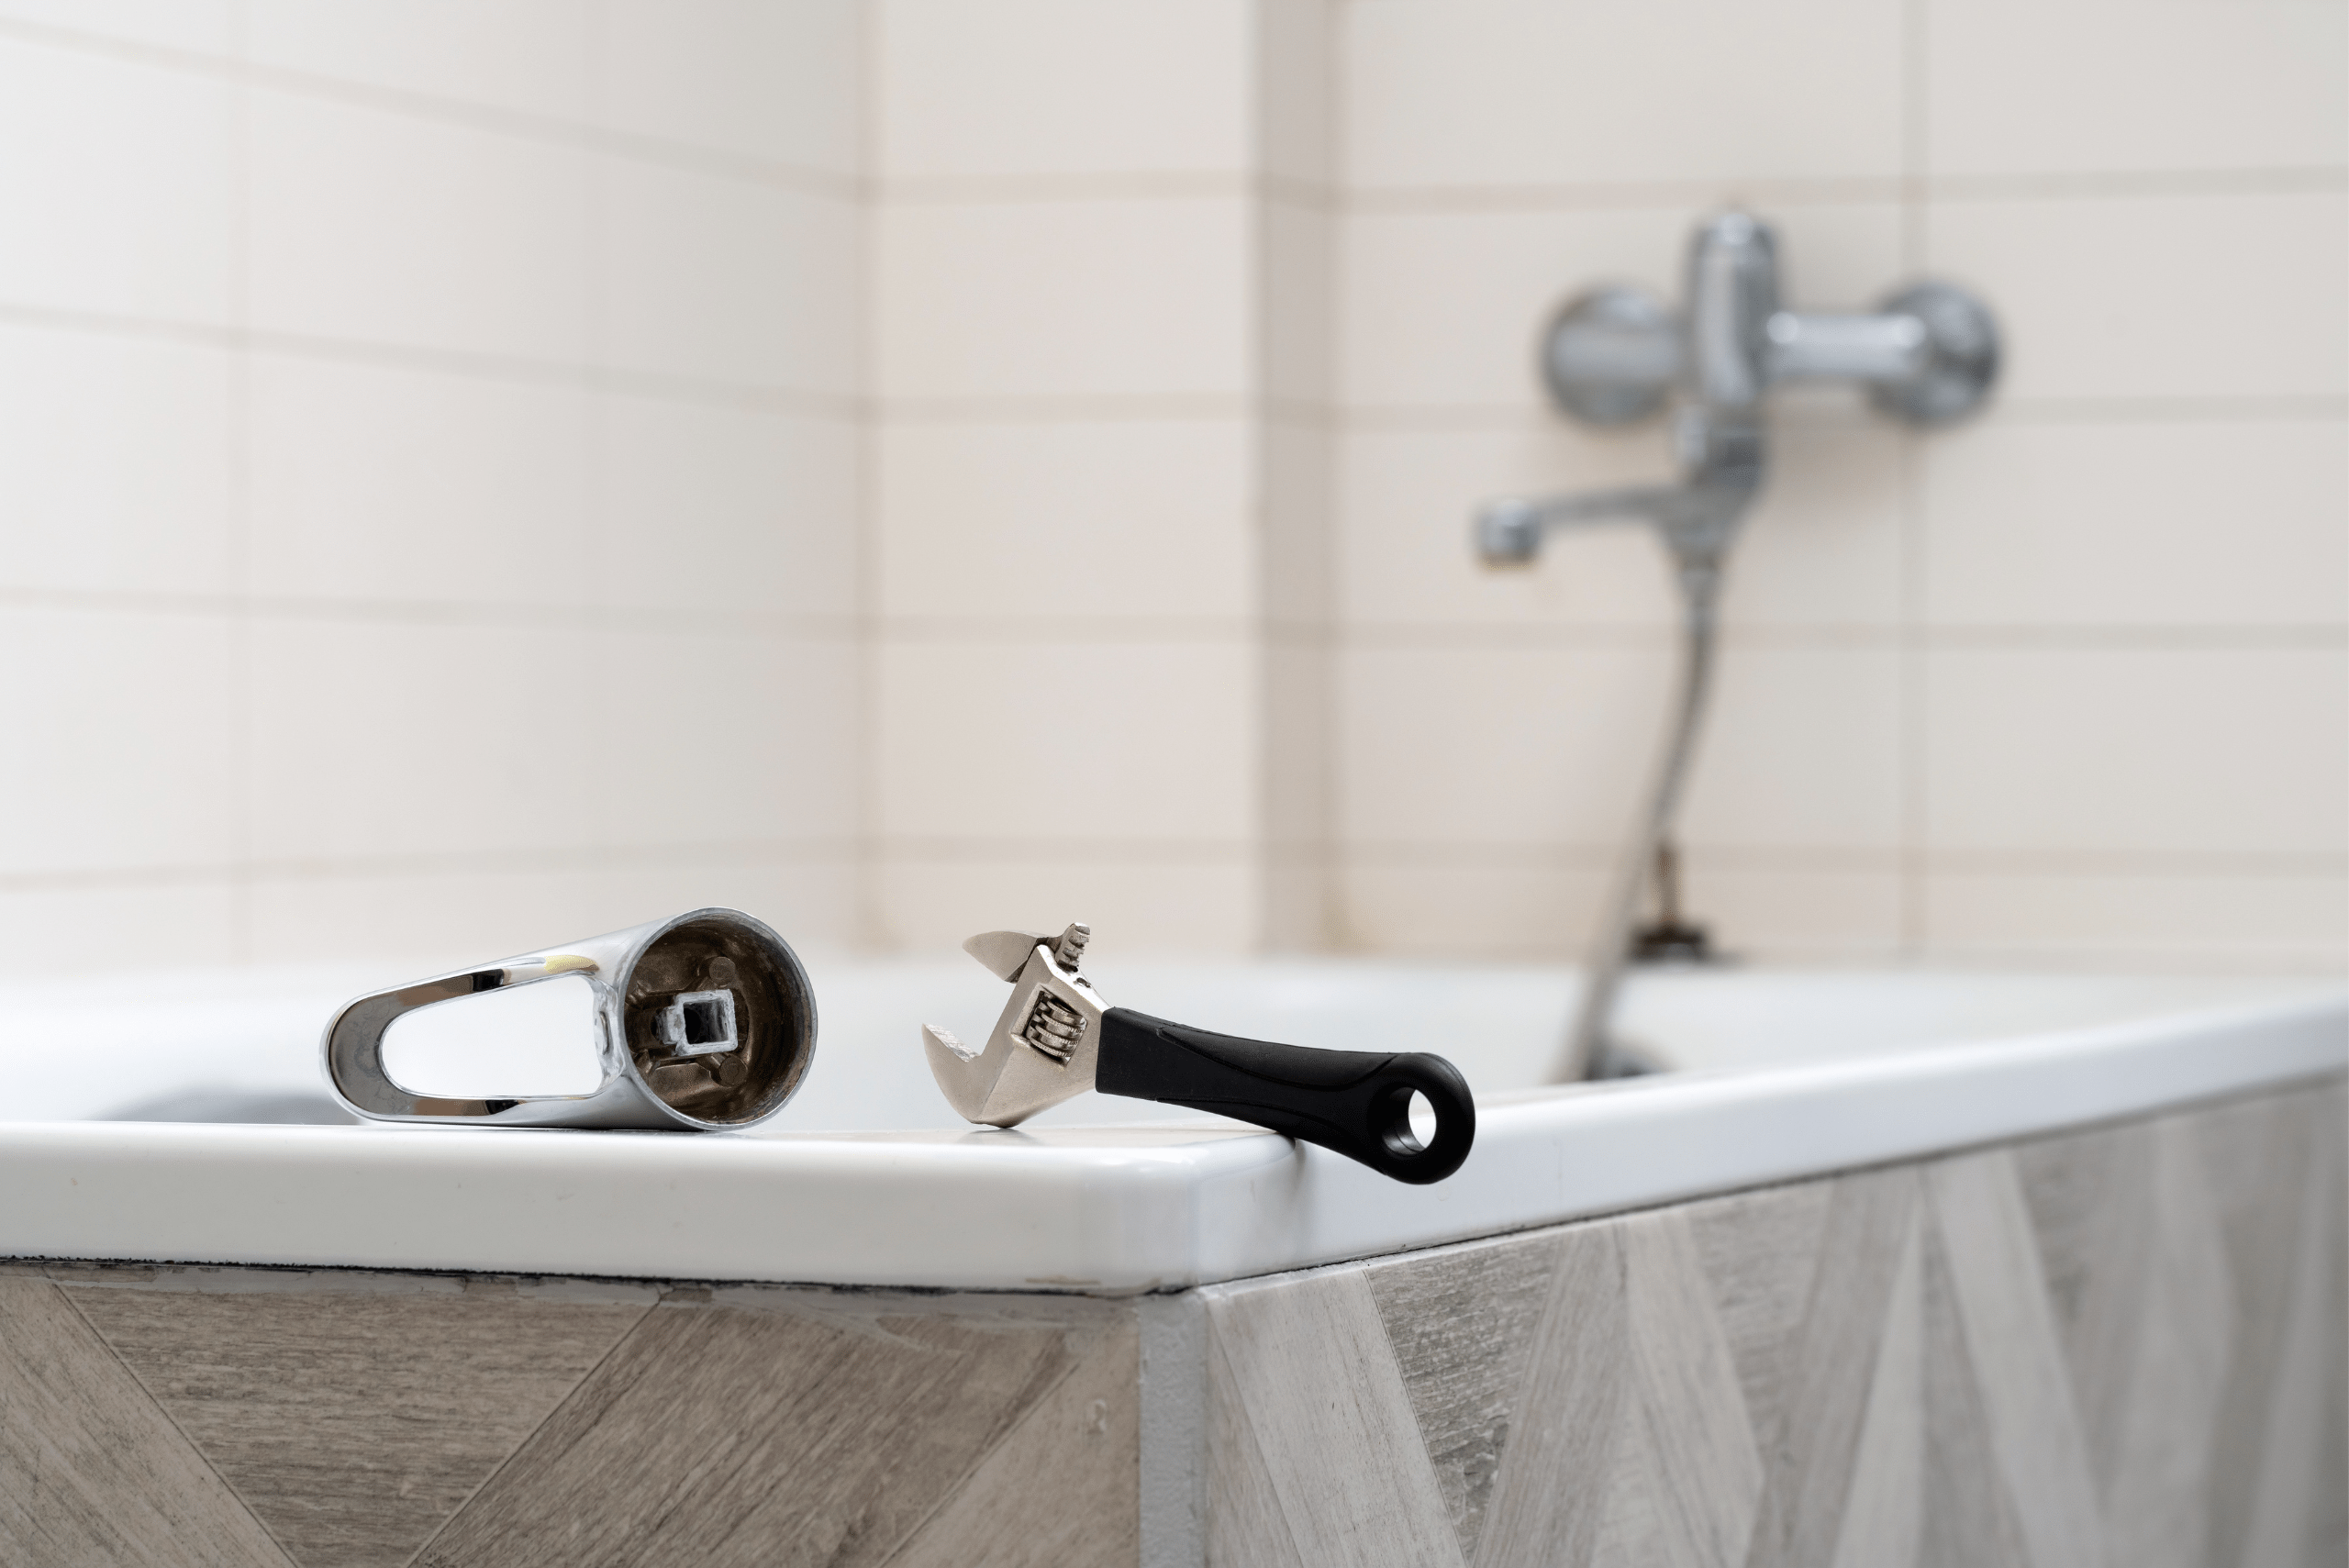 Bathtub with broken handle and an adjustable wrench.